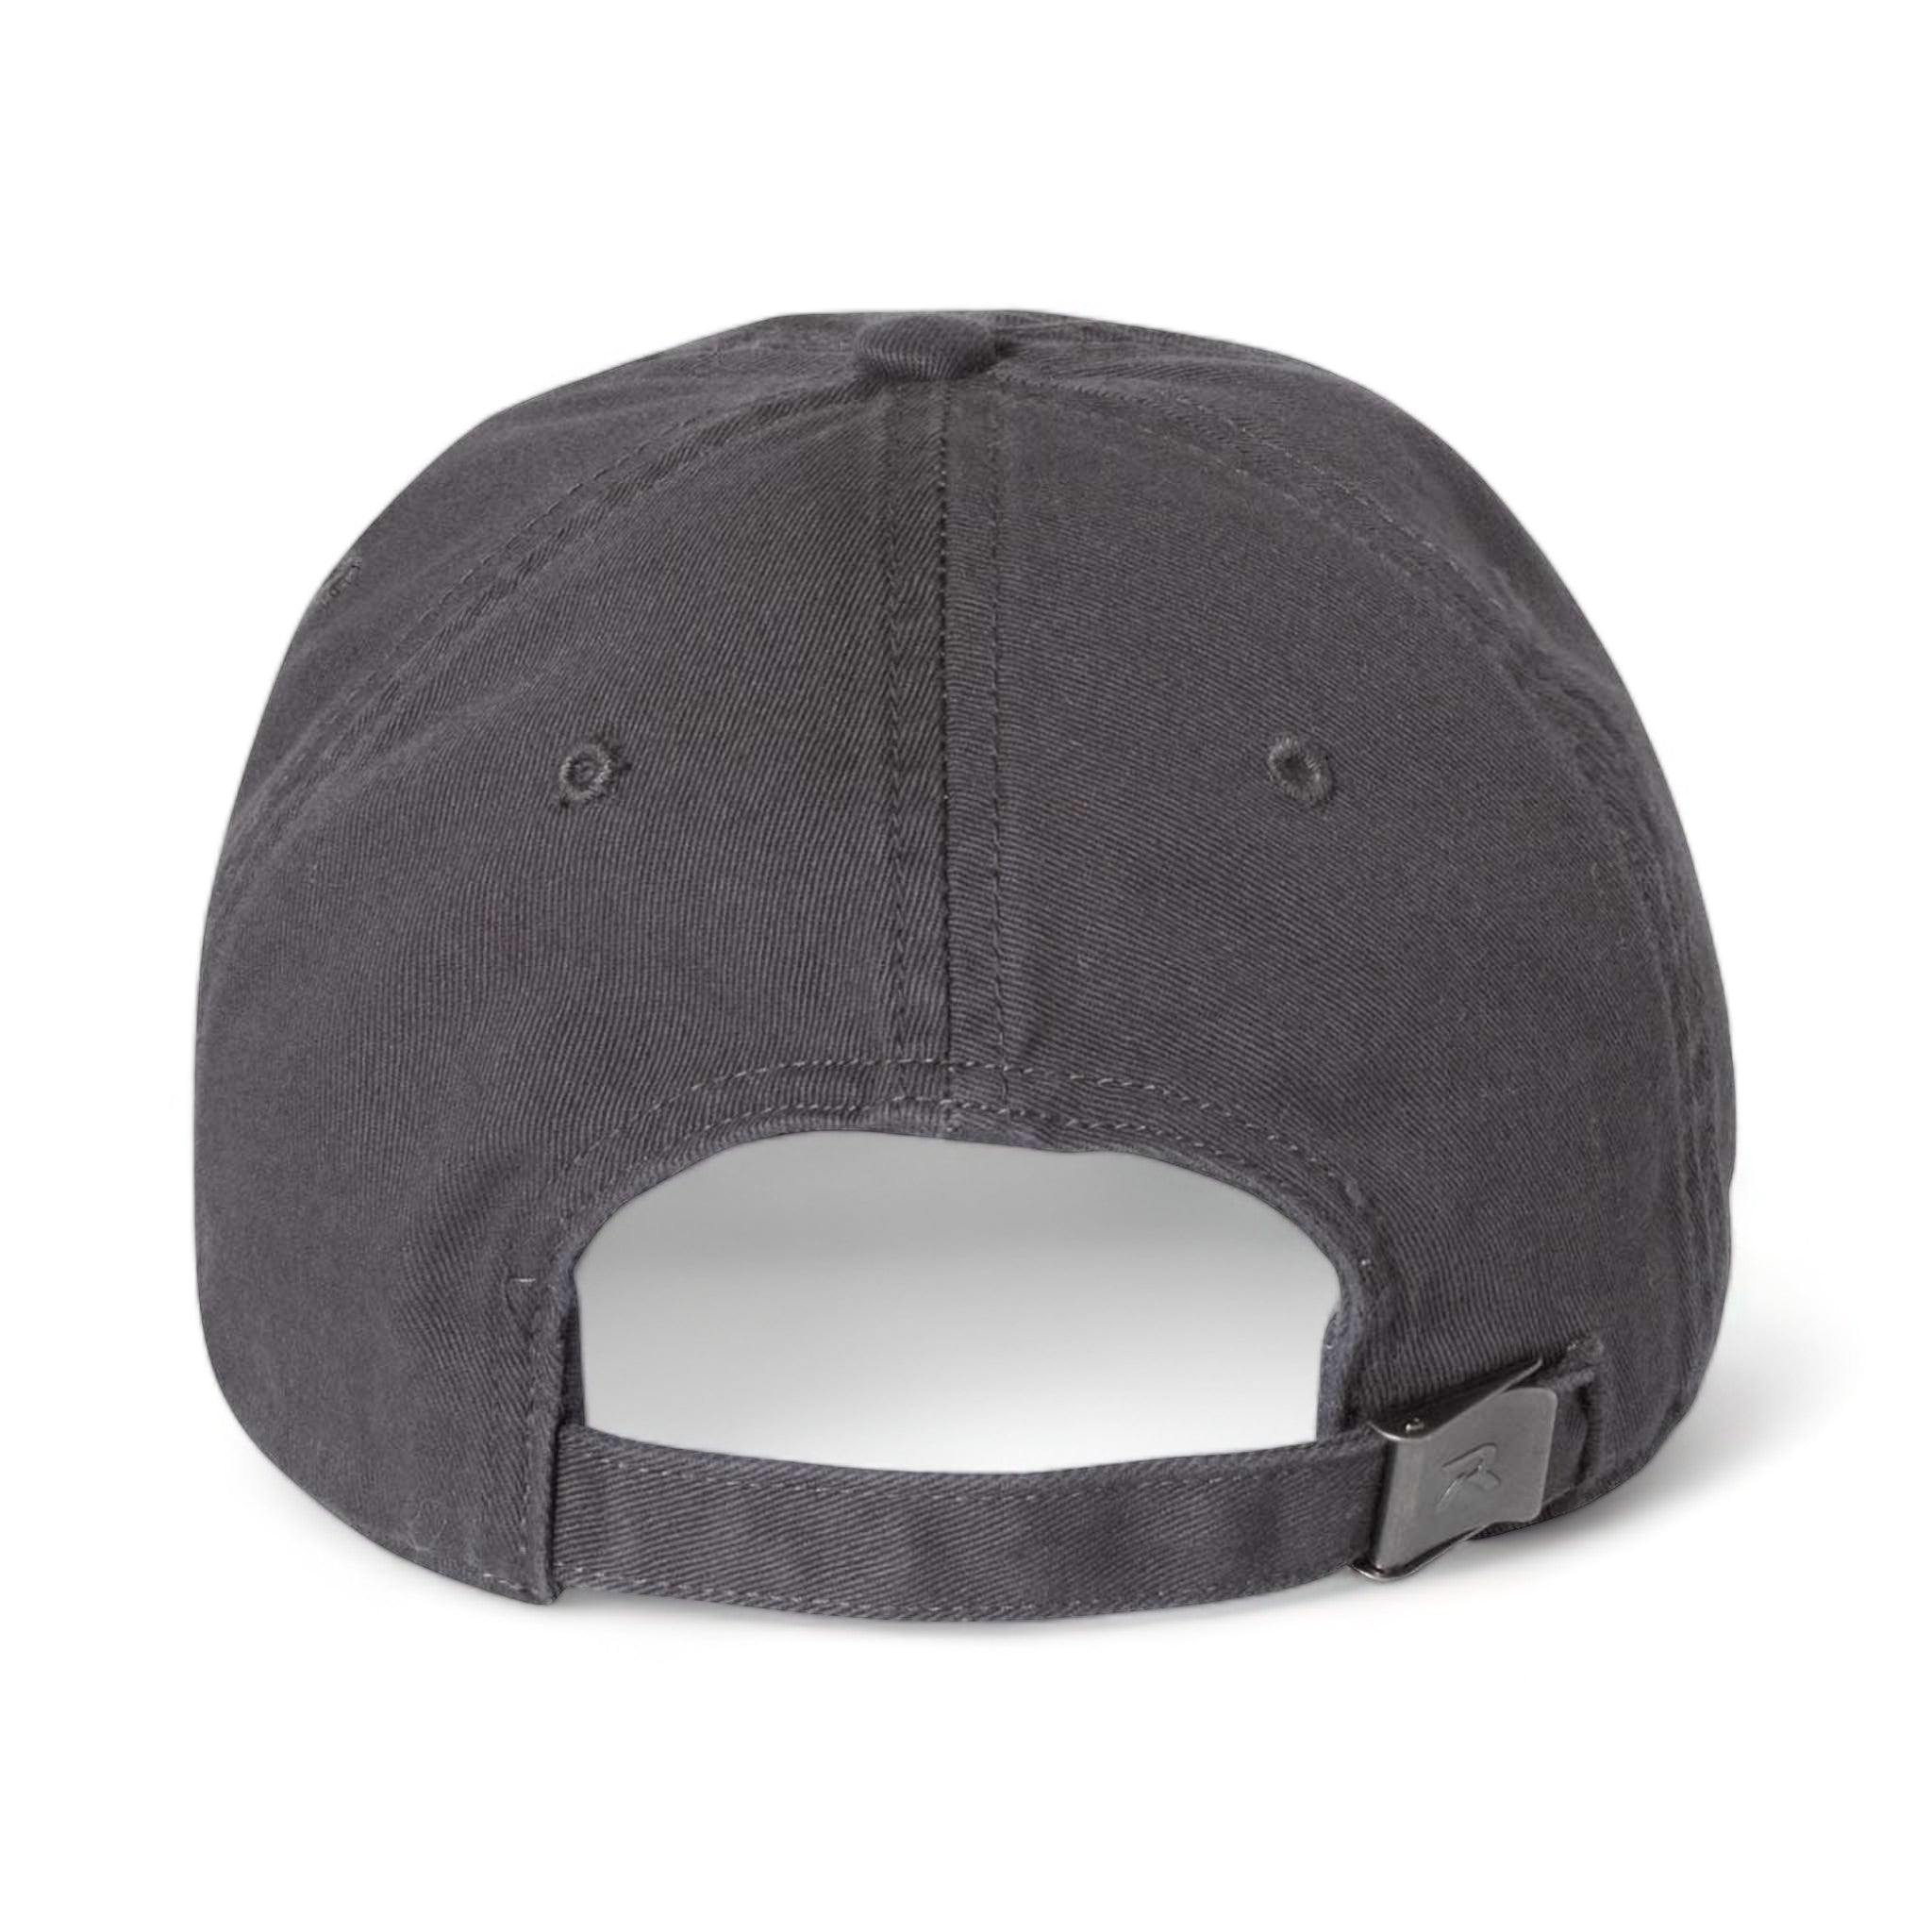 Back view of Richardson 320 custom hat in charcoal